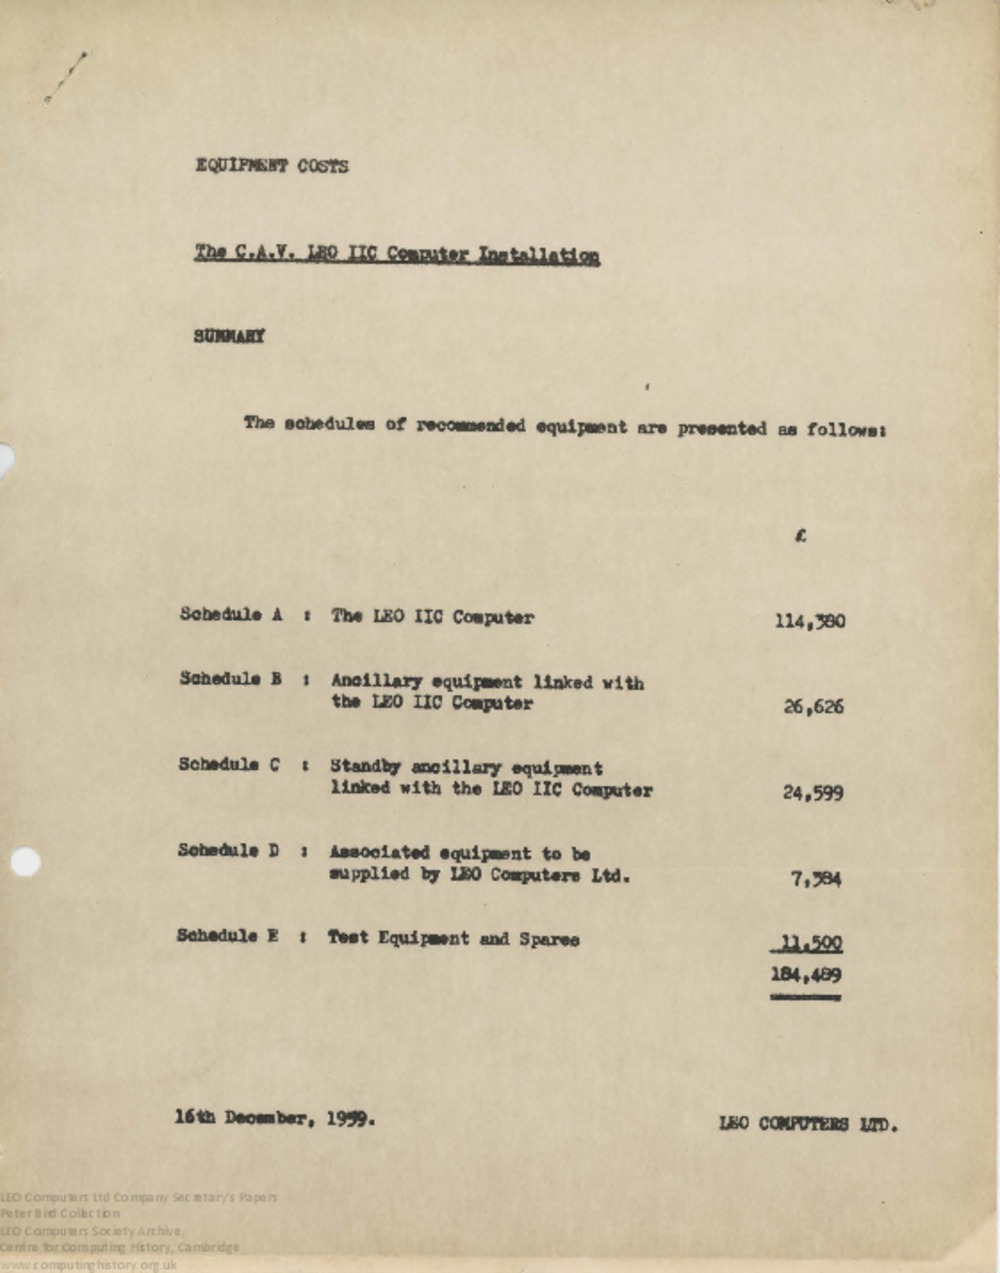 Article: 62465  Schedule of Equipment Costs (Quotation) for LEO II installation at CAV, 16 Dec 1959